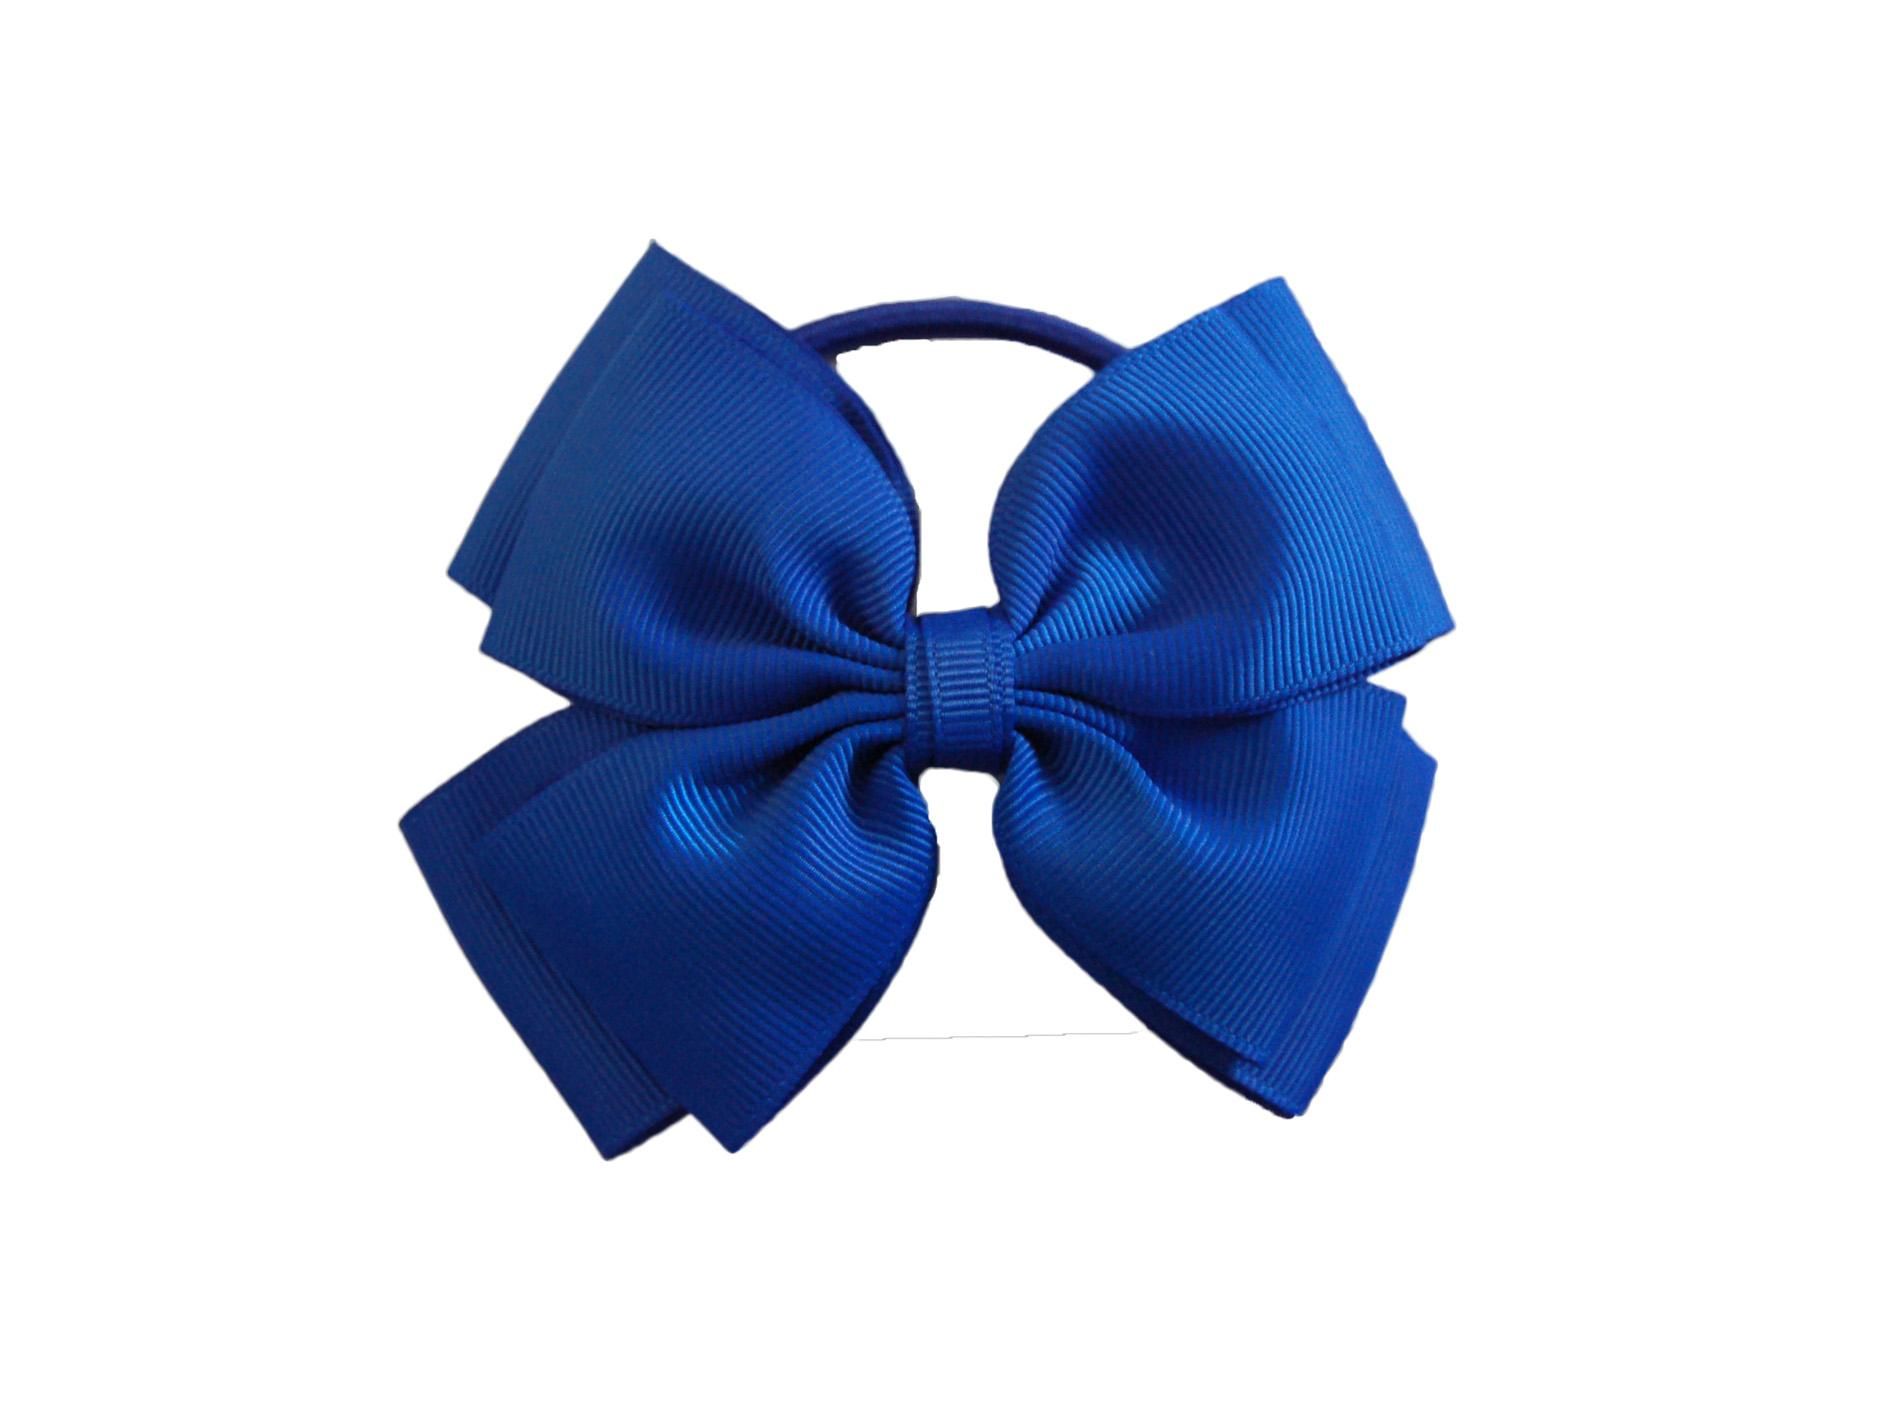 1. Large Royal Blue Hair Bow with Alligator Clip - wide 7